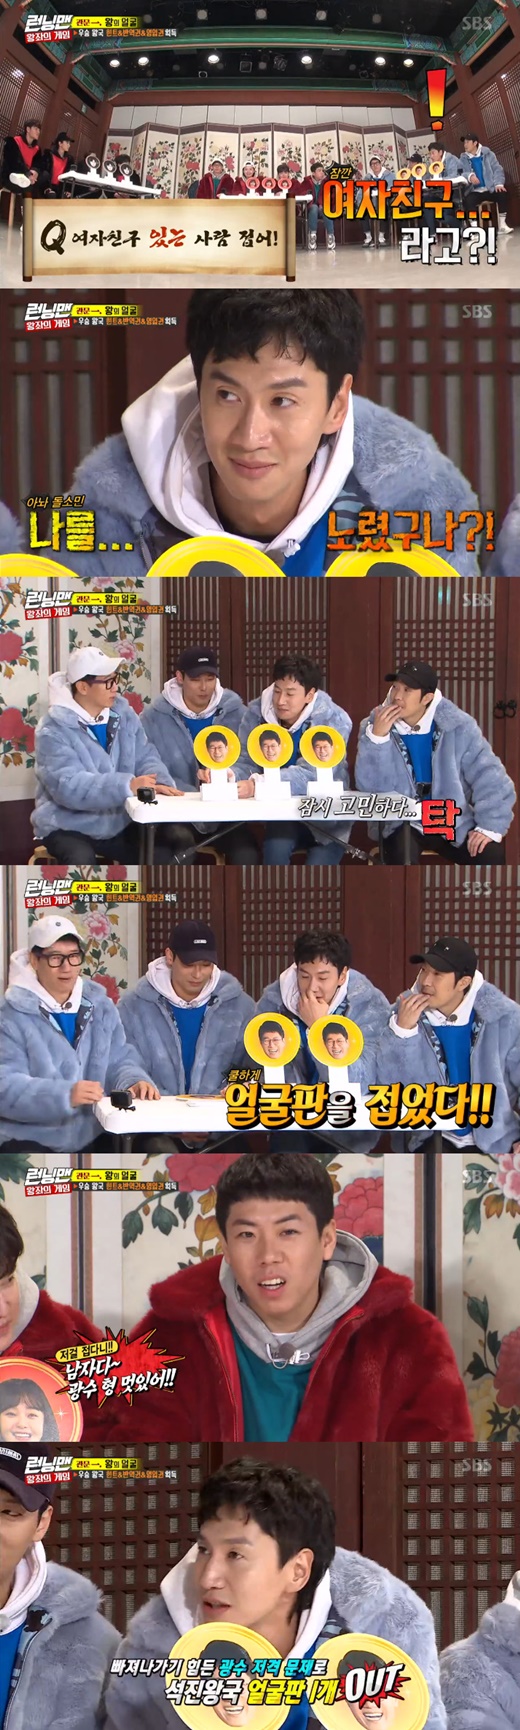 Actor Lee Kwang-soo was embarrassed by the attack aimed at his GFriend Lee Sun-bin.On SBS Running Man broadcasted on the 3rd, SBS monthly drama Hatch performers Goa, Jung Il Woo, Kwon Yul and Park Hoon appeared.On the day of the game, Jeon So-min said, Fold a person with a GFriend. Lee Kwang-soo was embarrassed and noticed.Ji Seok-jin then joked to Lee Kwang-soo, Call me now and tell me how to break up. So Lee Kwang-soo finally folded the sign.How can we not get out of it? Lee said.